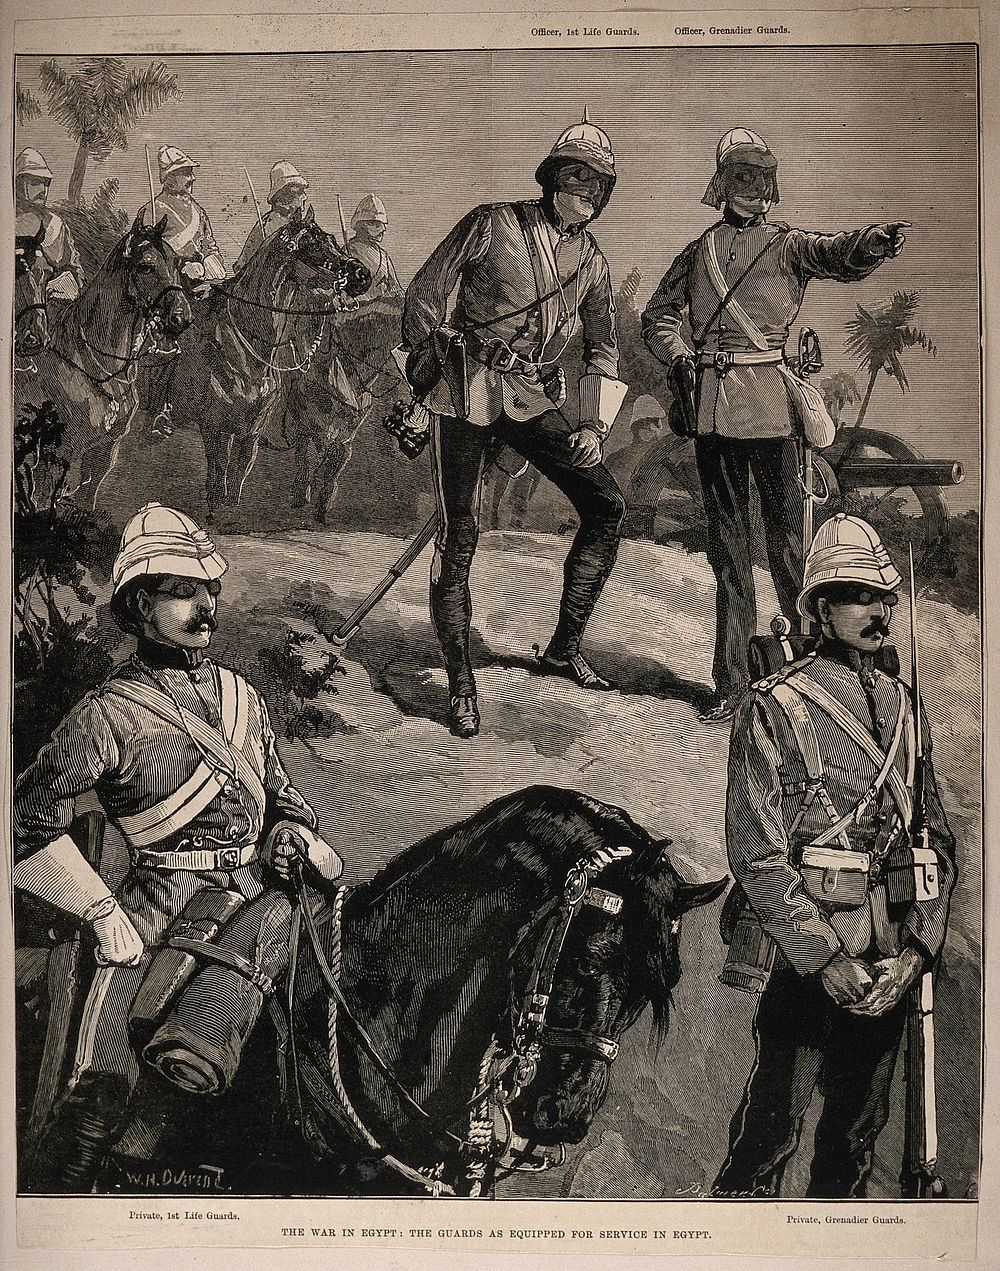 War in Egypt, Egypt: soldiers using the new eye protection and head gear. Wood engraving by W.J. Palmer after W.H. Overend.